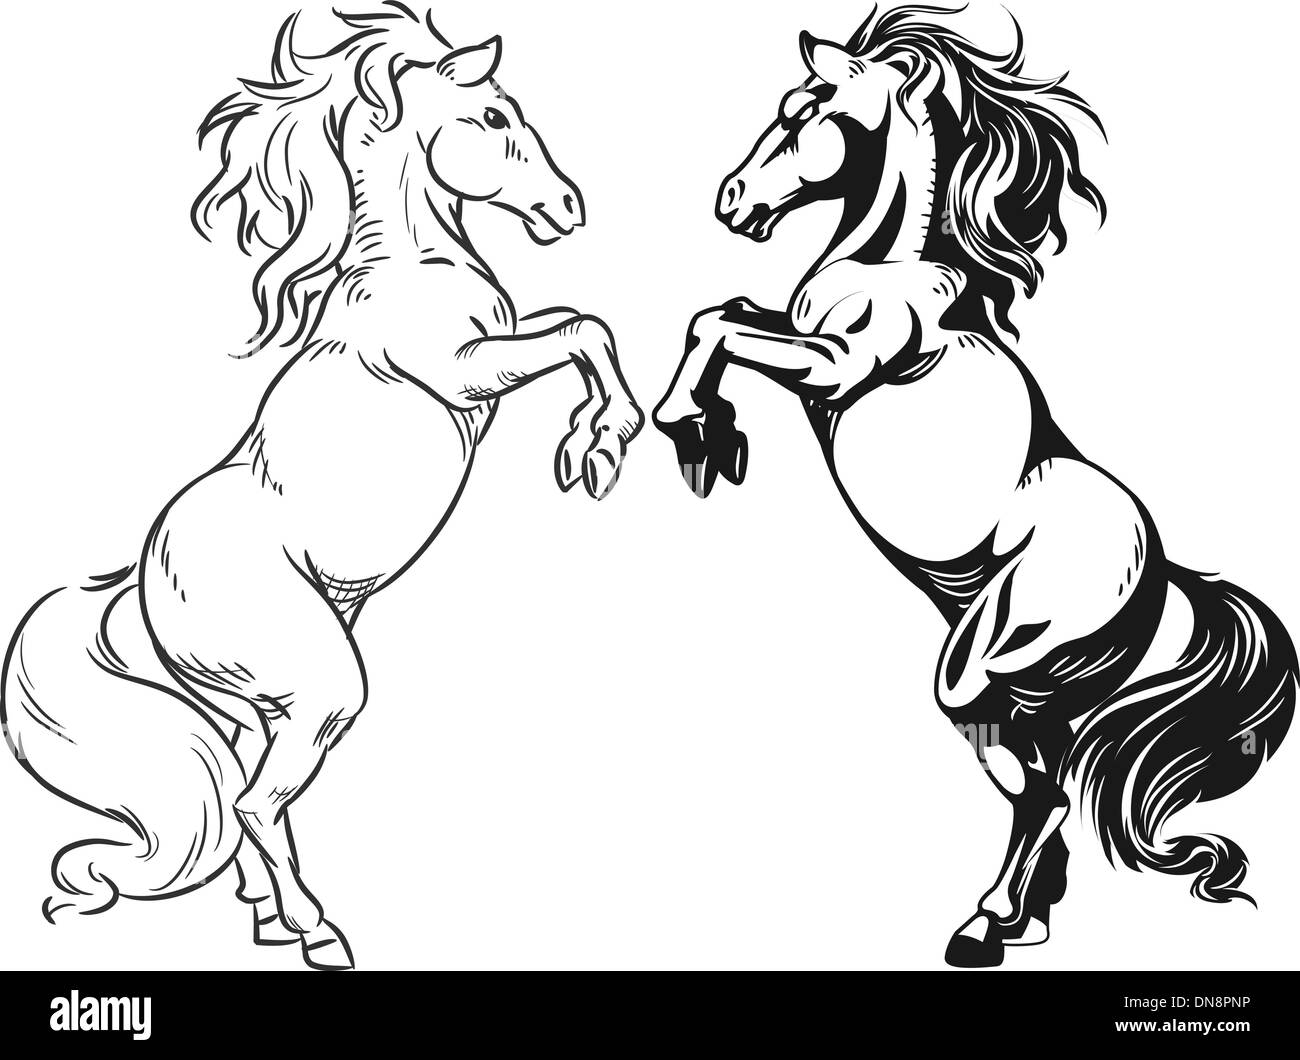 Sketch of Prancing Stallion or Horse Stock Vector